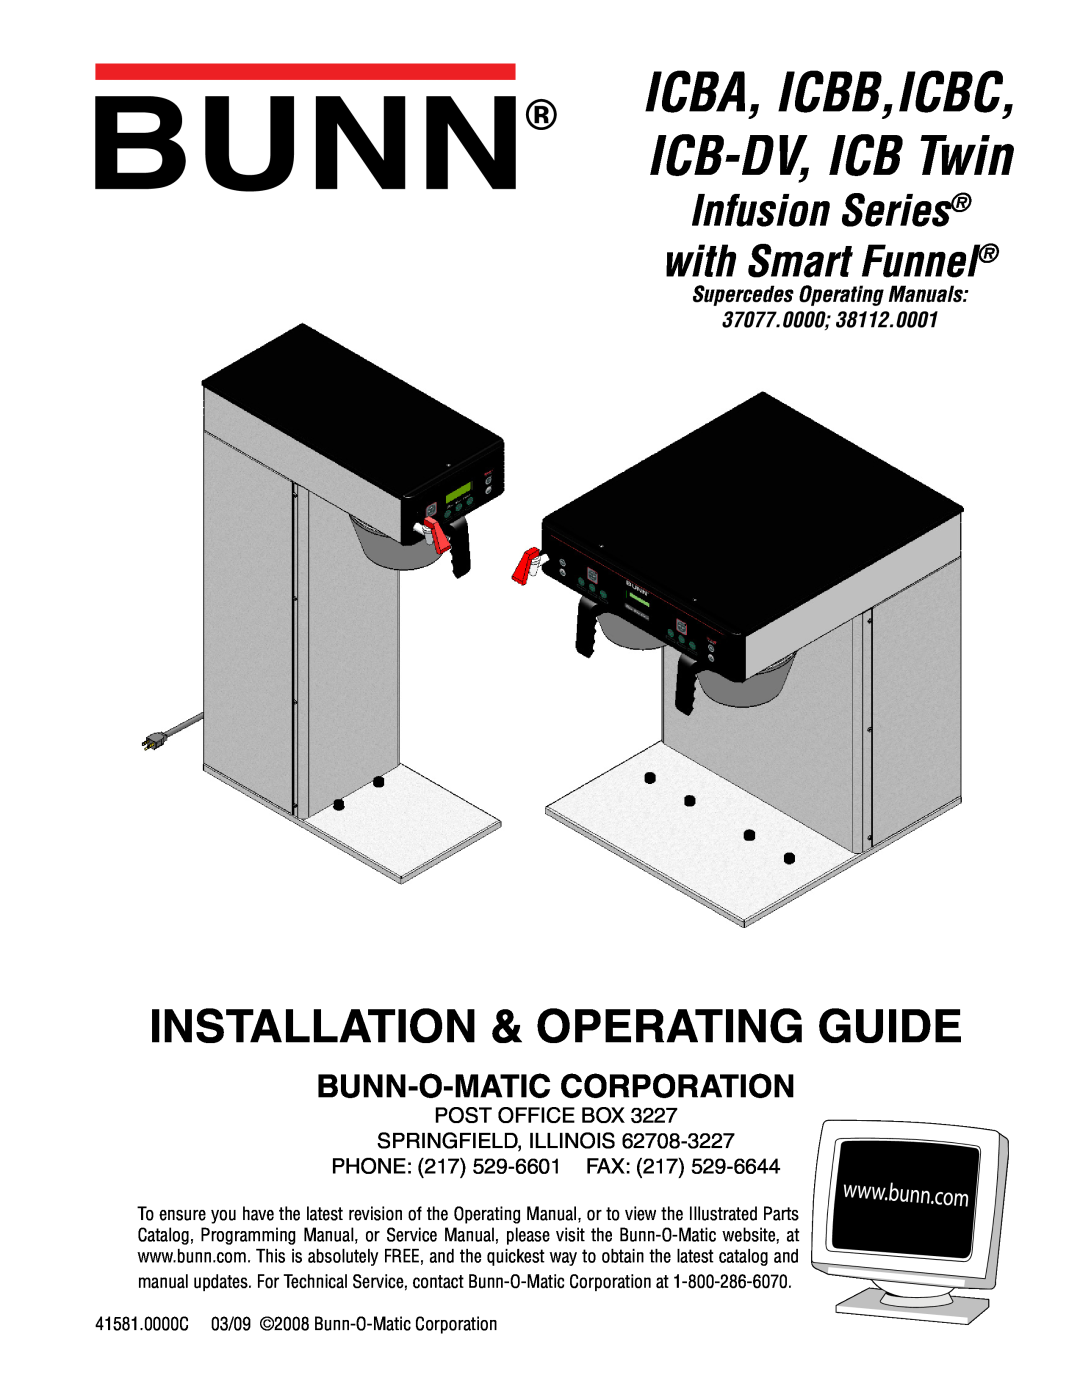 Bunn service manual ICBA, ICBB,ICBC ICB-DV, ICB Twin, Installation & Operating Guide, Infusion Series with Smart Funnel 